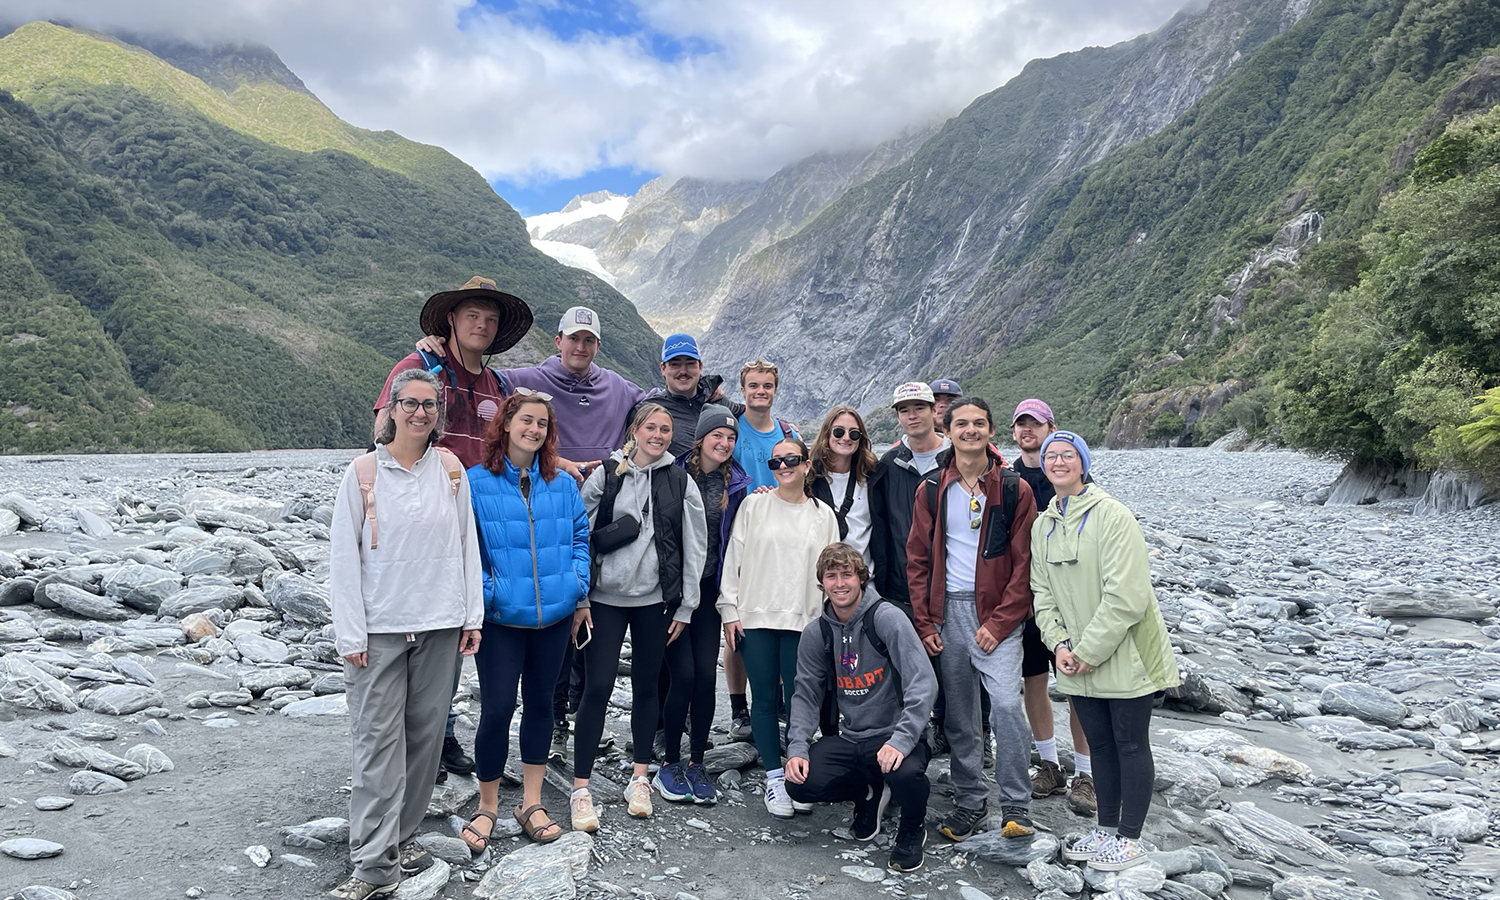 In New Zealand, students studying abroad with Associate Professor of Environmental Studies Whitney Mauer take a group photo at the South Island of Aotearoa.